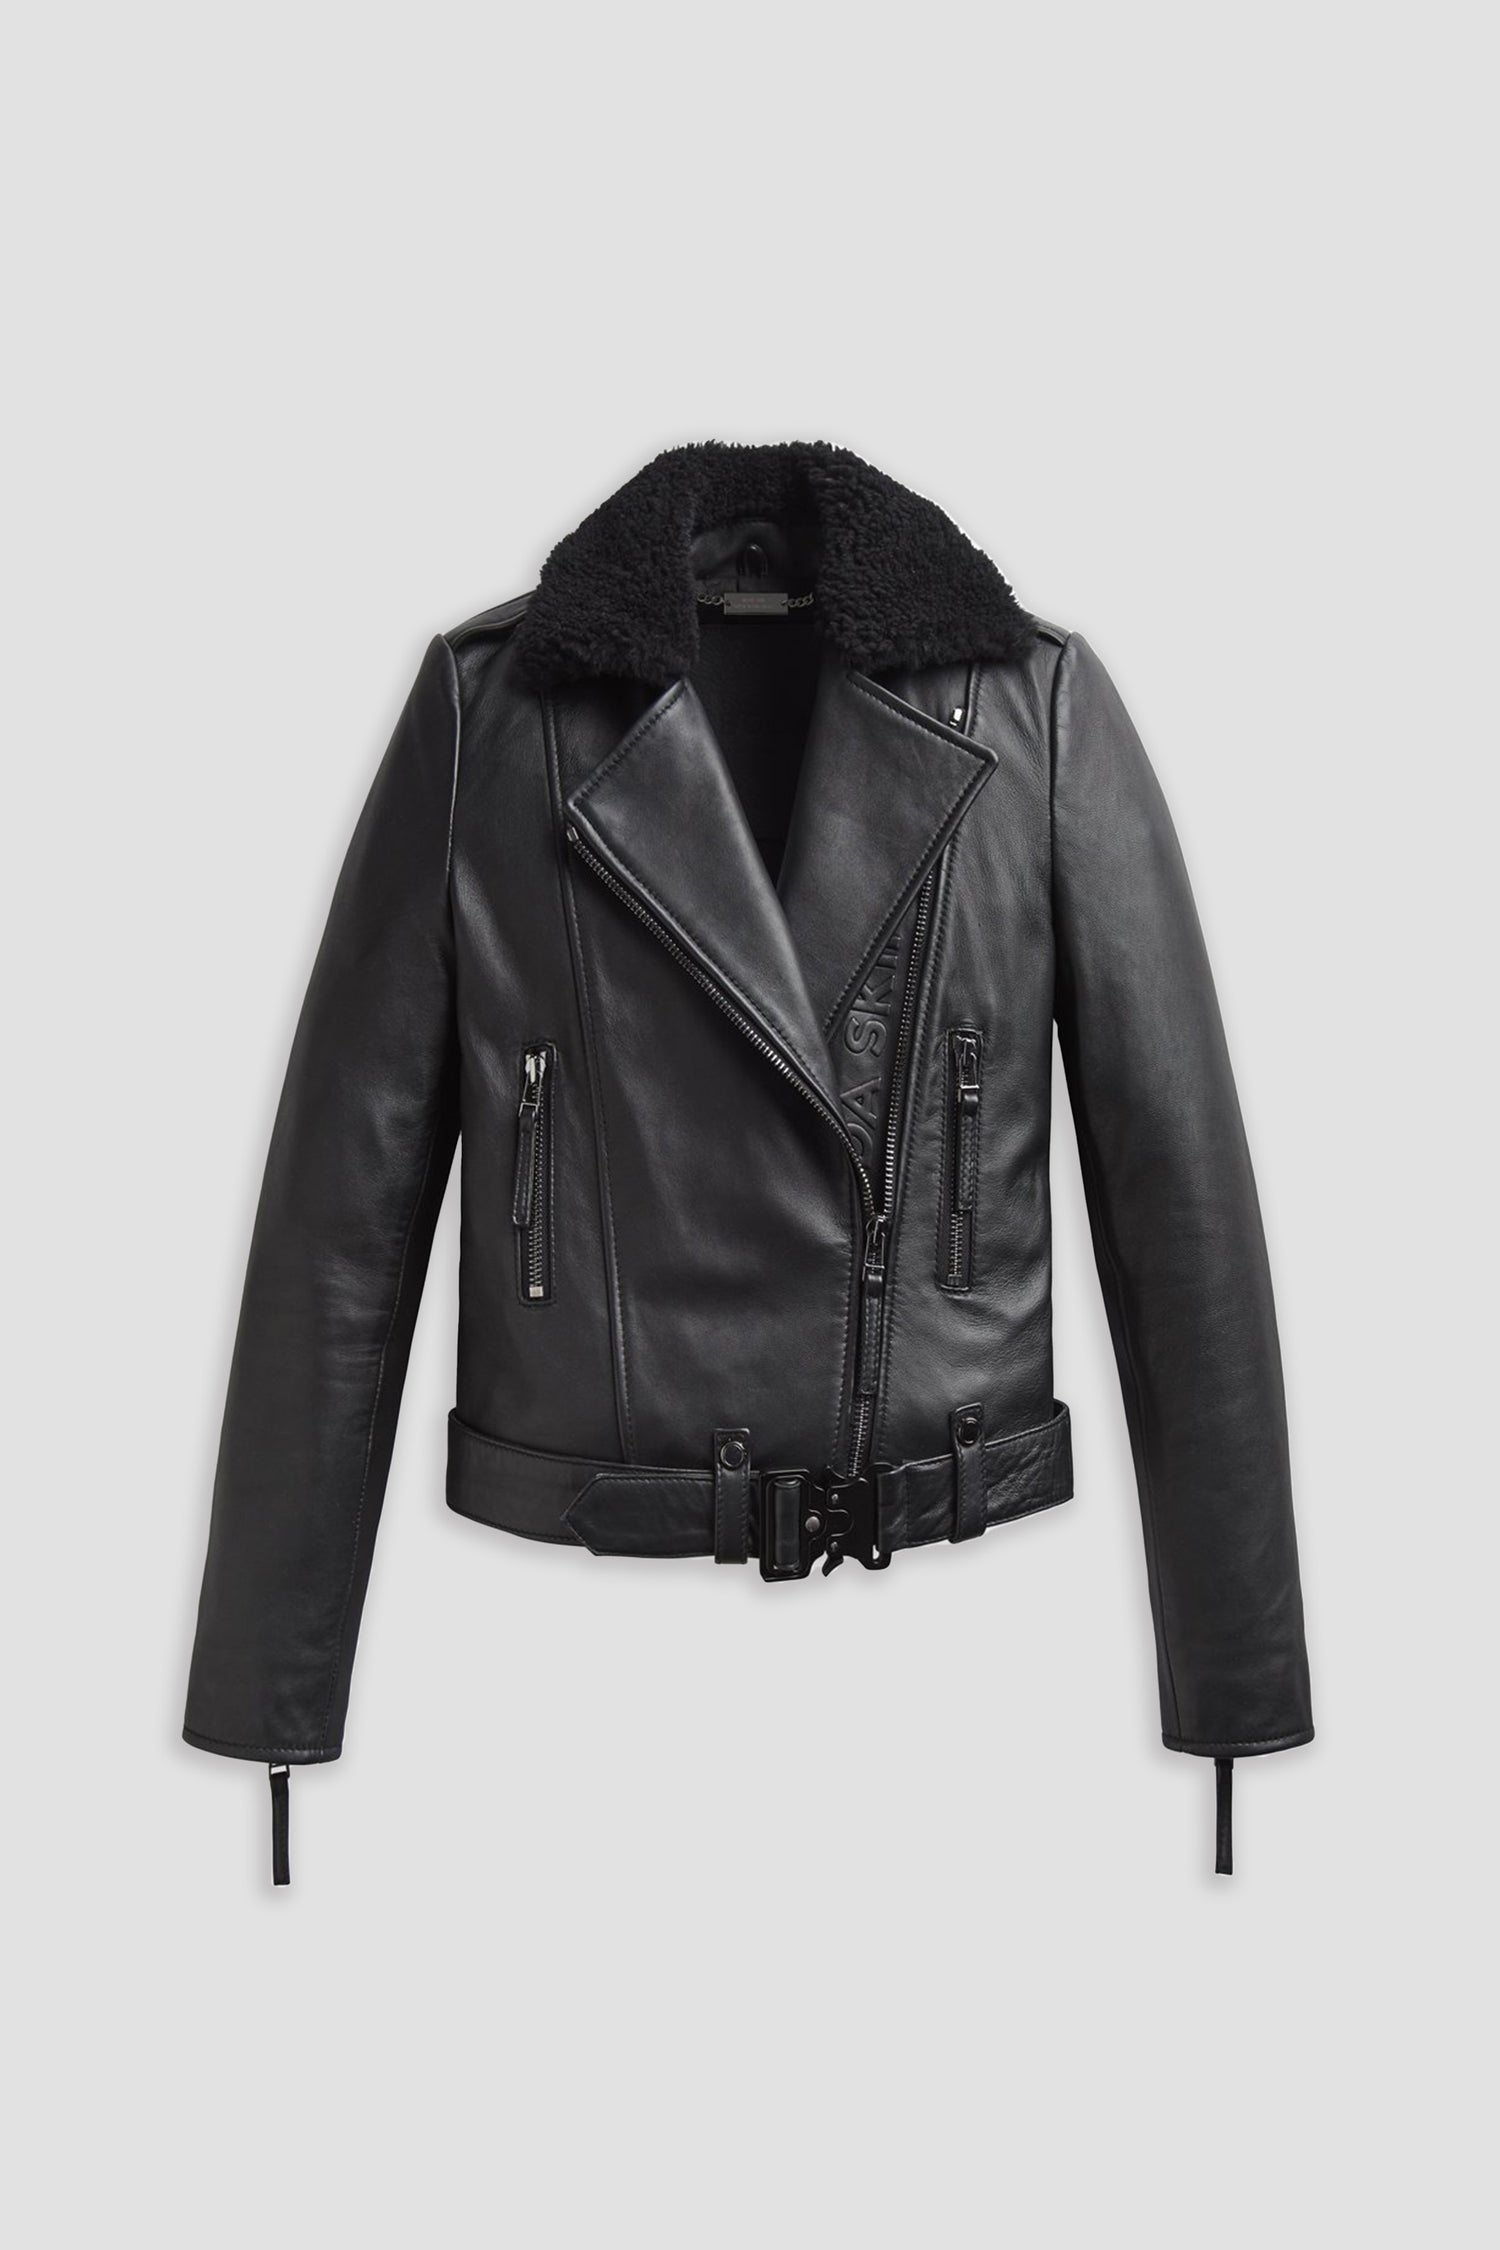 Womens Leather Jackets - By Price: Lowest to Highest